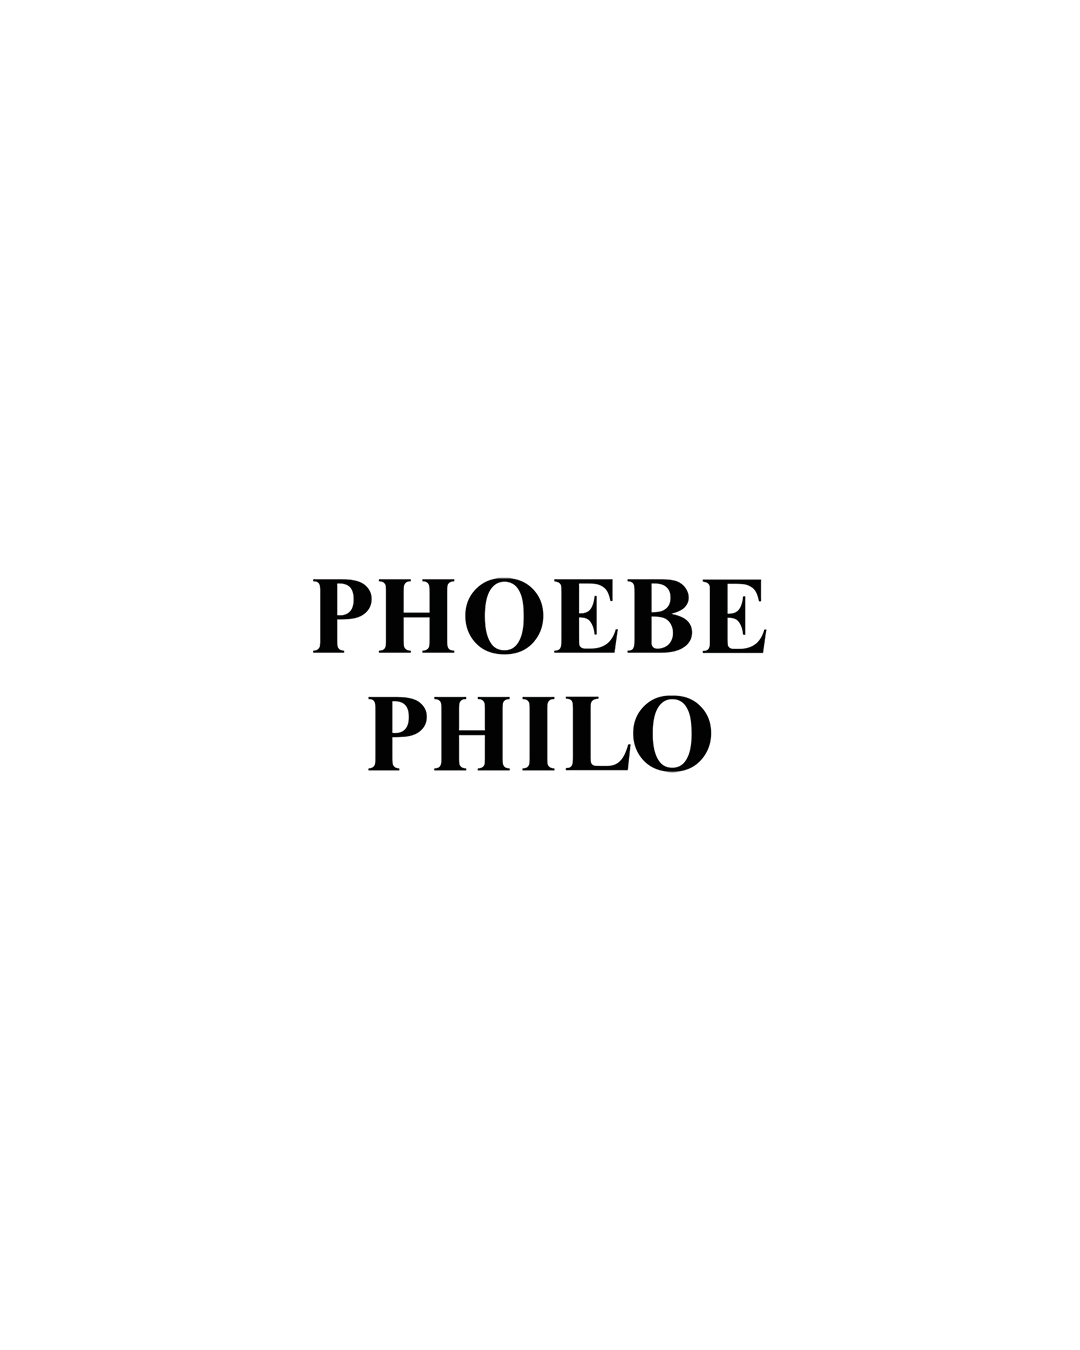 Jeremy Danté on X: BREAKING: Phoebe Philo returns to fashion with Phoebe  Philo Studio, January 2022. LVMH owns mini rotor stake, but Phoebe will  create something totally original. GAGGING. Save now. This